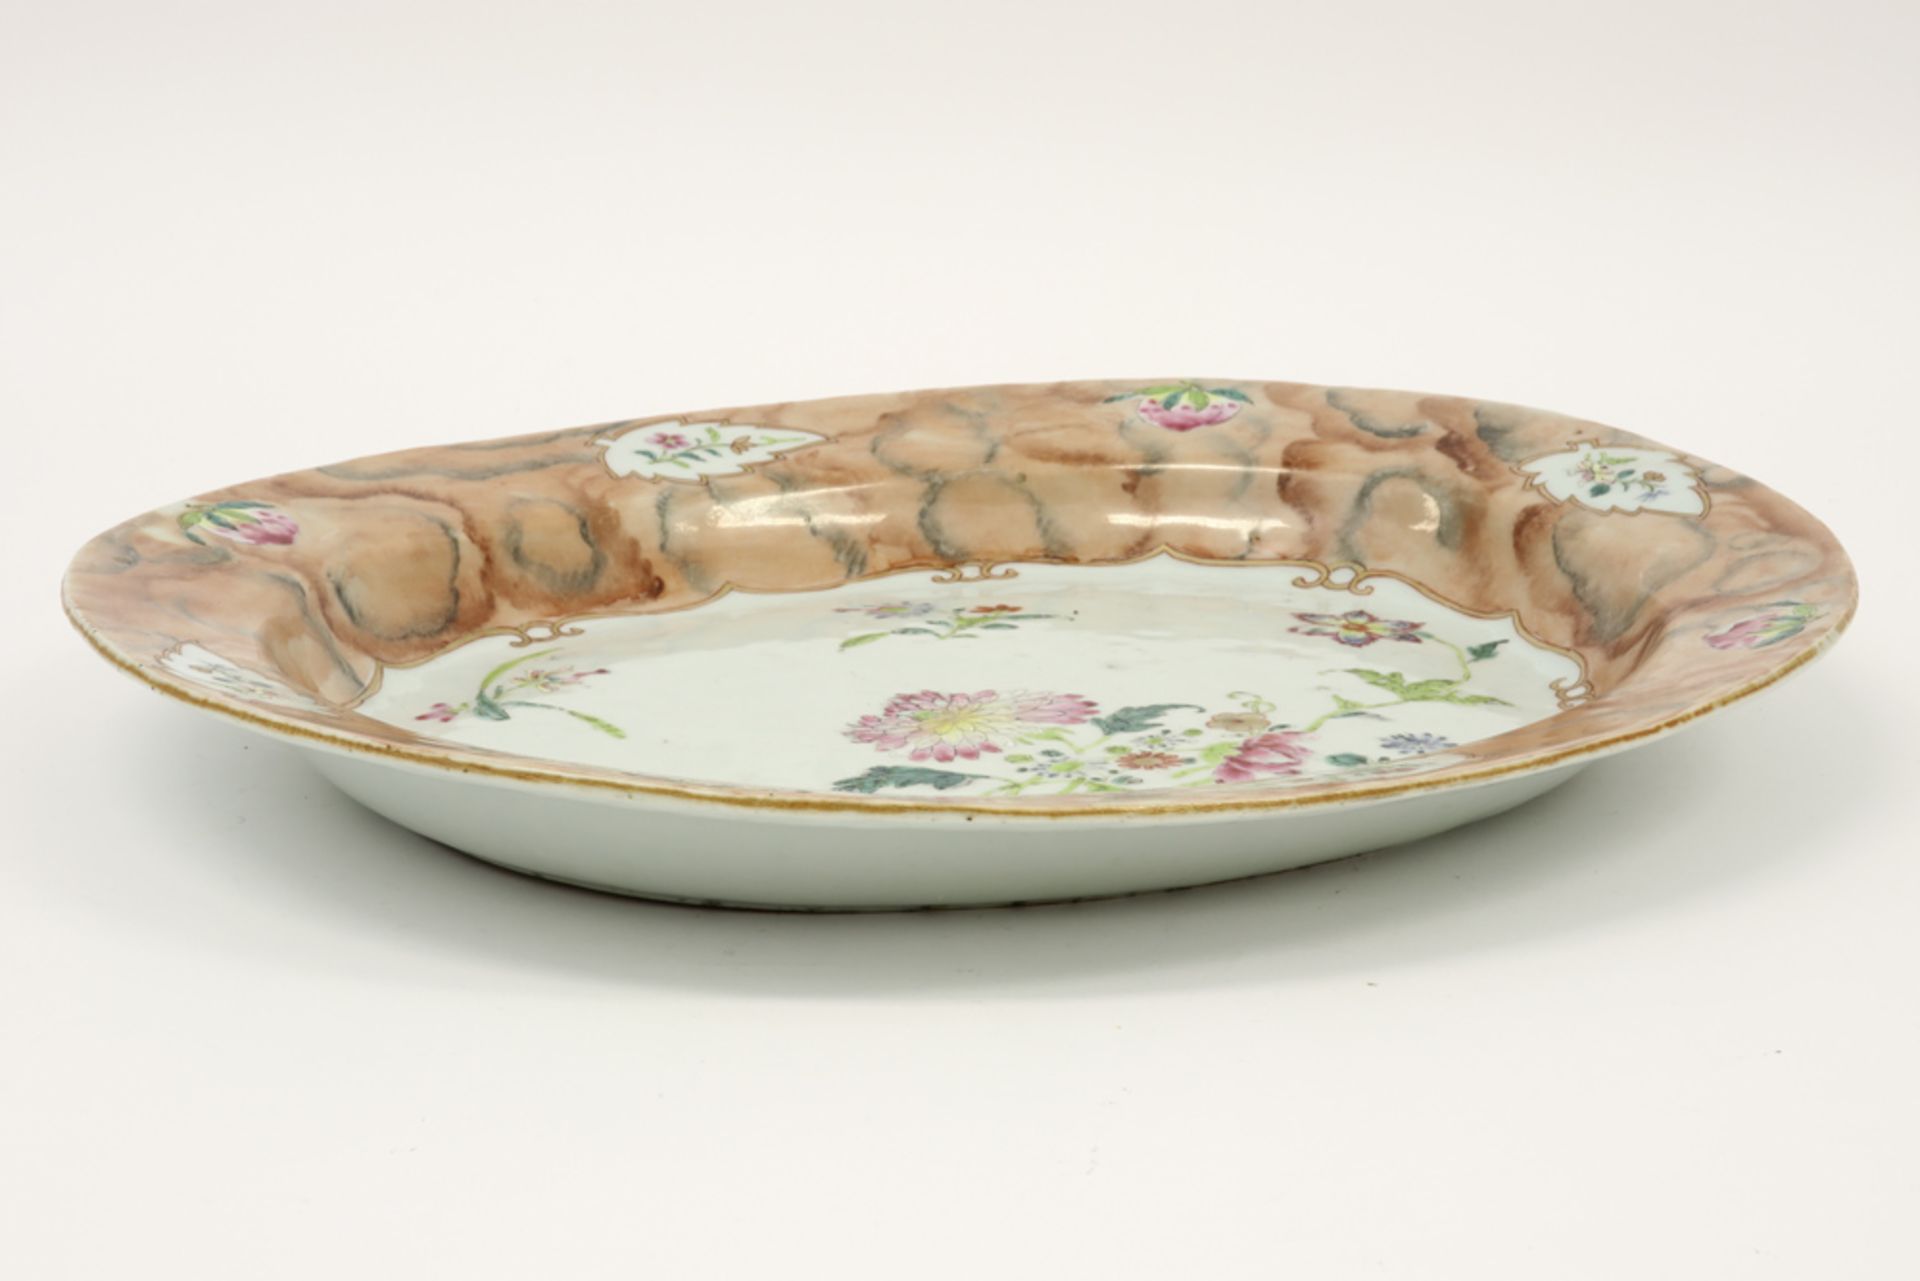 quite rare oval 18th Cent. Chinese "faux marbre" dish in porcelain with a 'Famille Rose' flower - Image 3 of 3